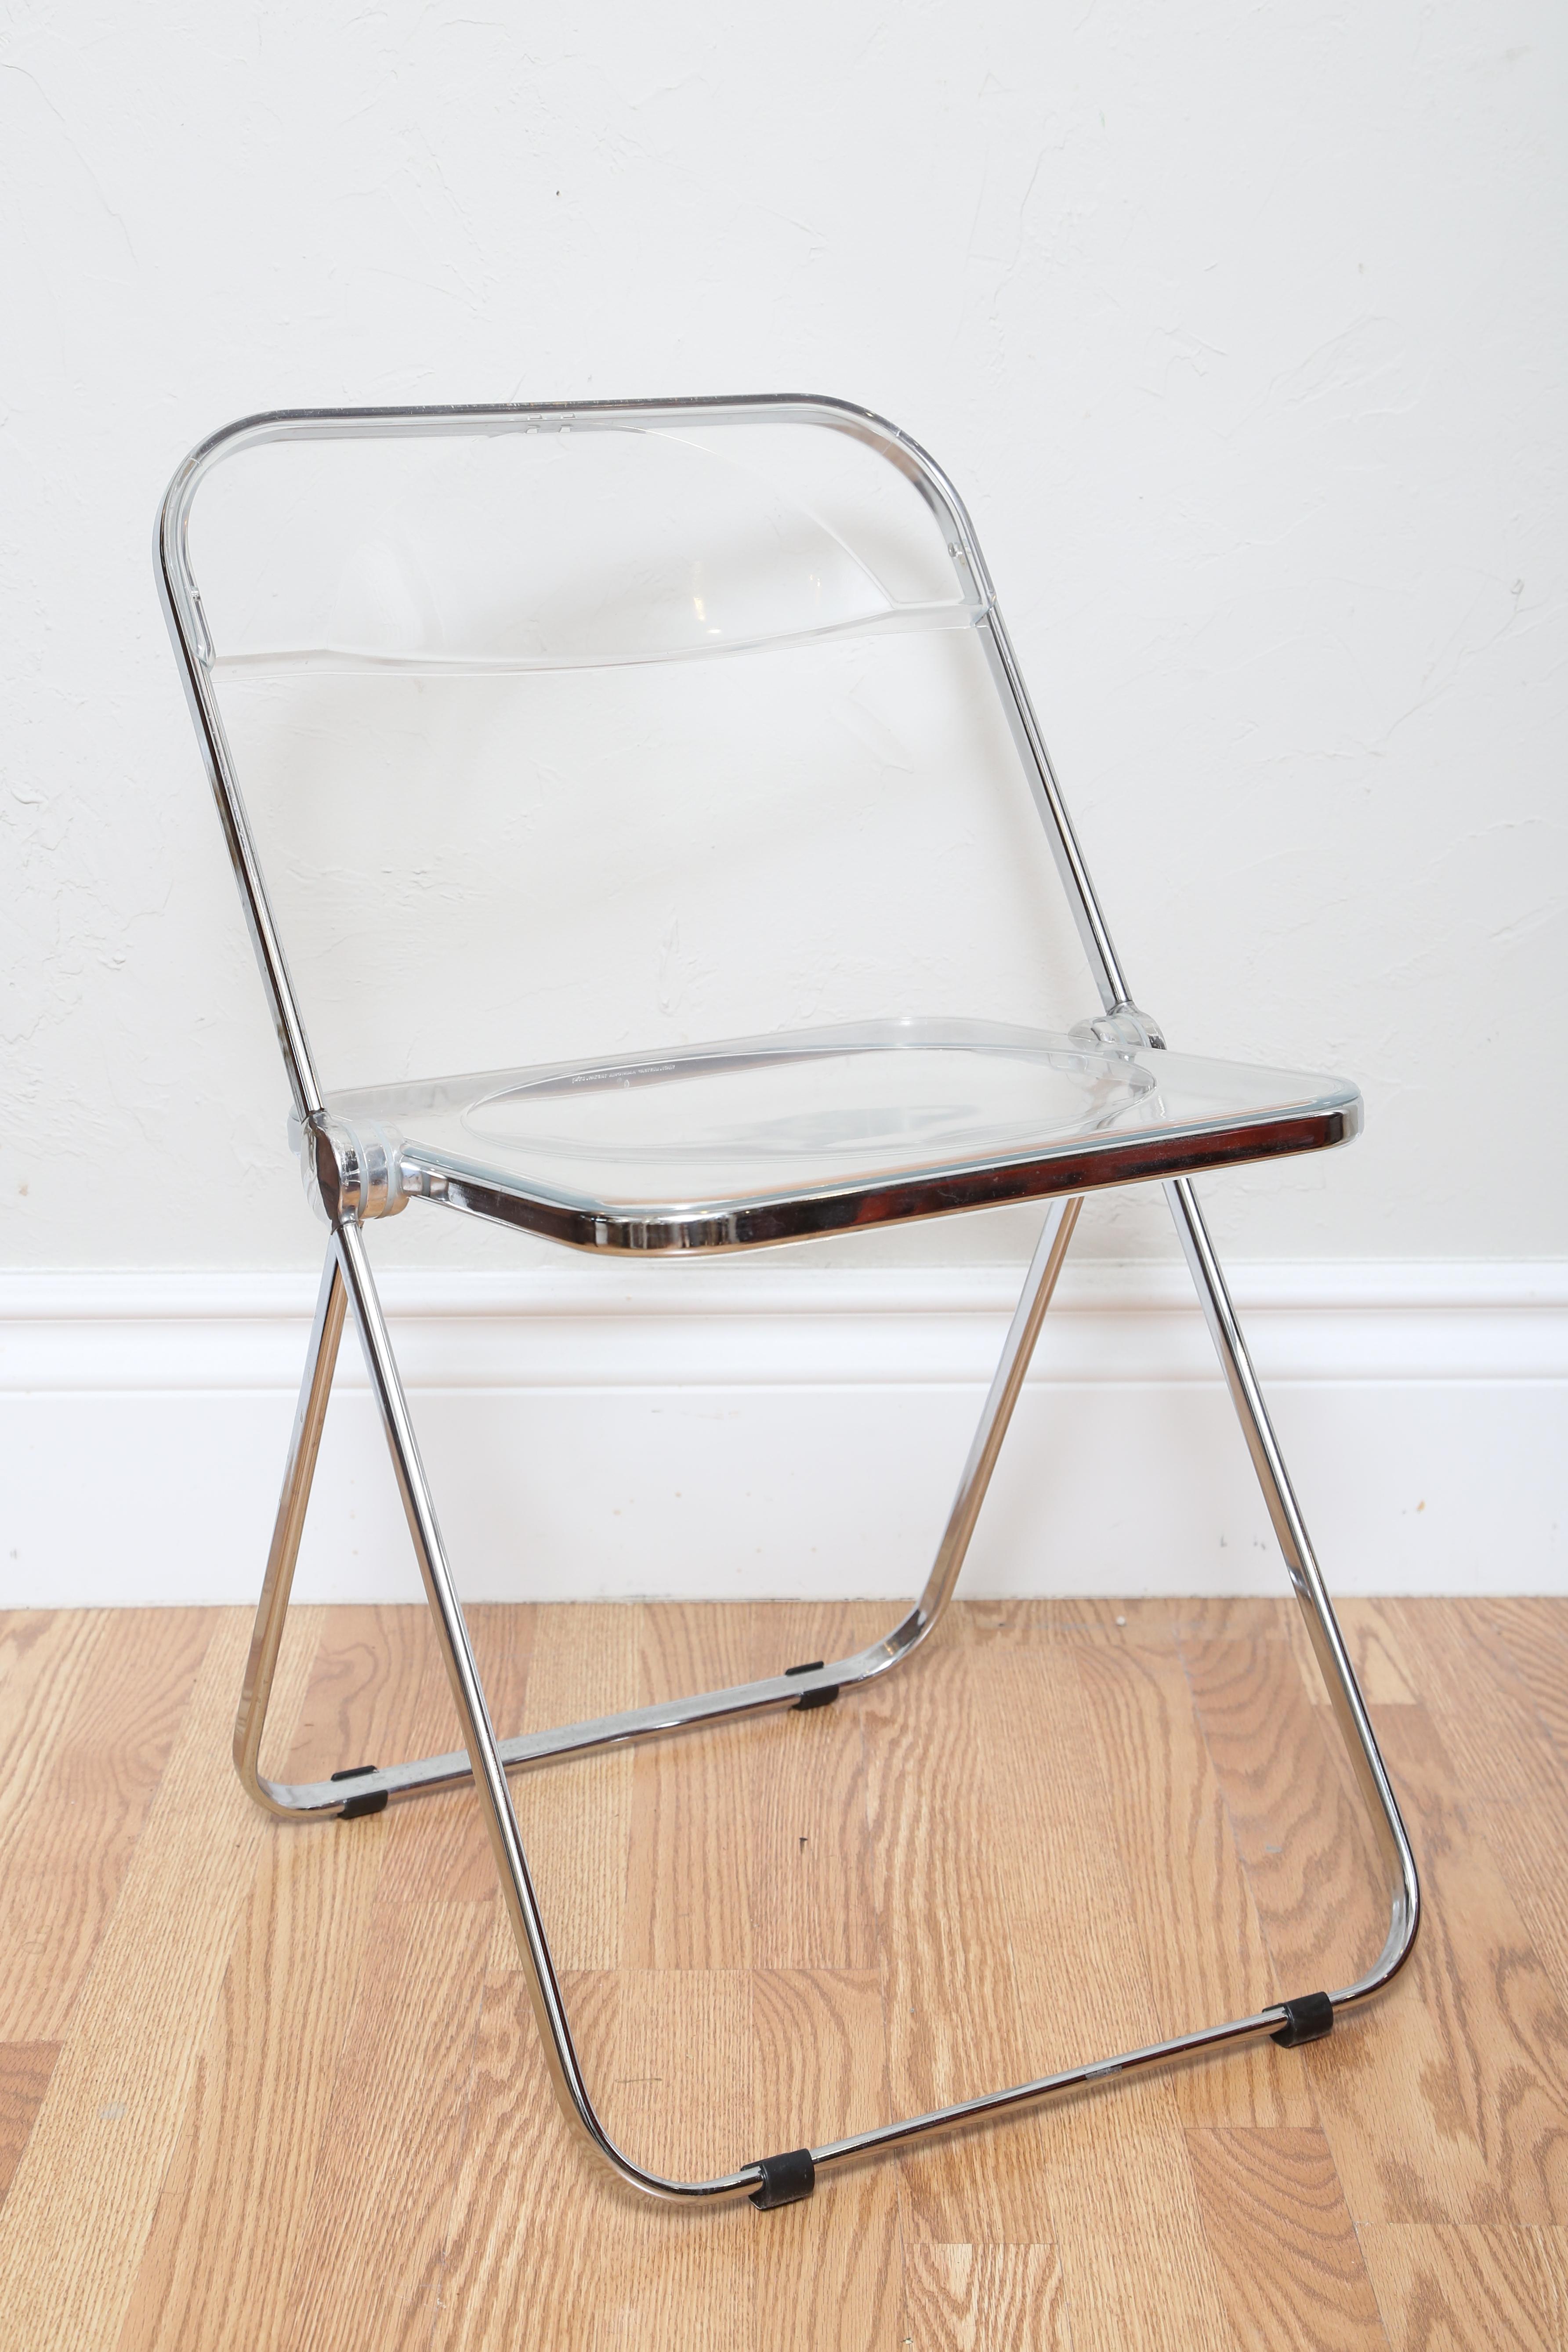 Set of four chrome and Lucite folding chairs made in Italy by Castelli.